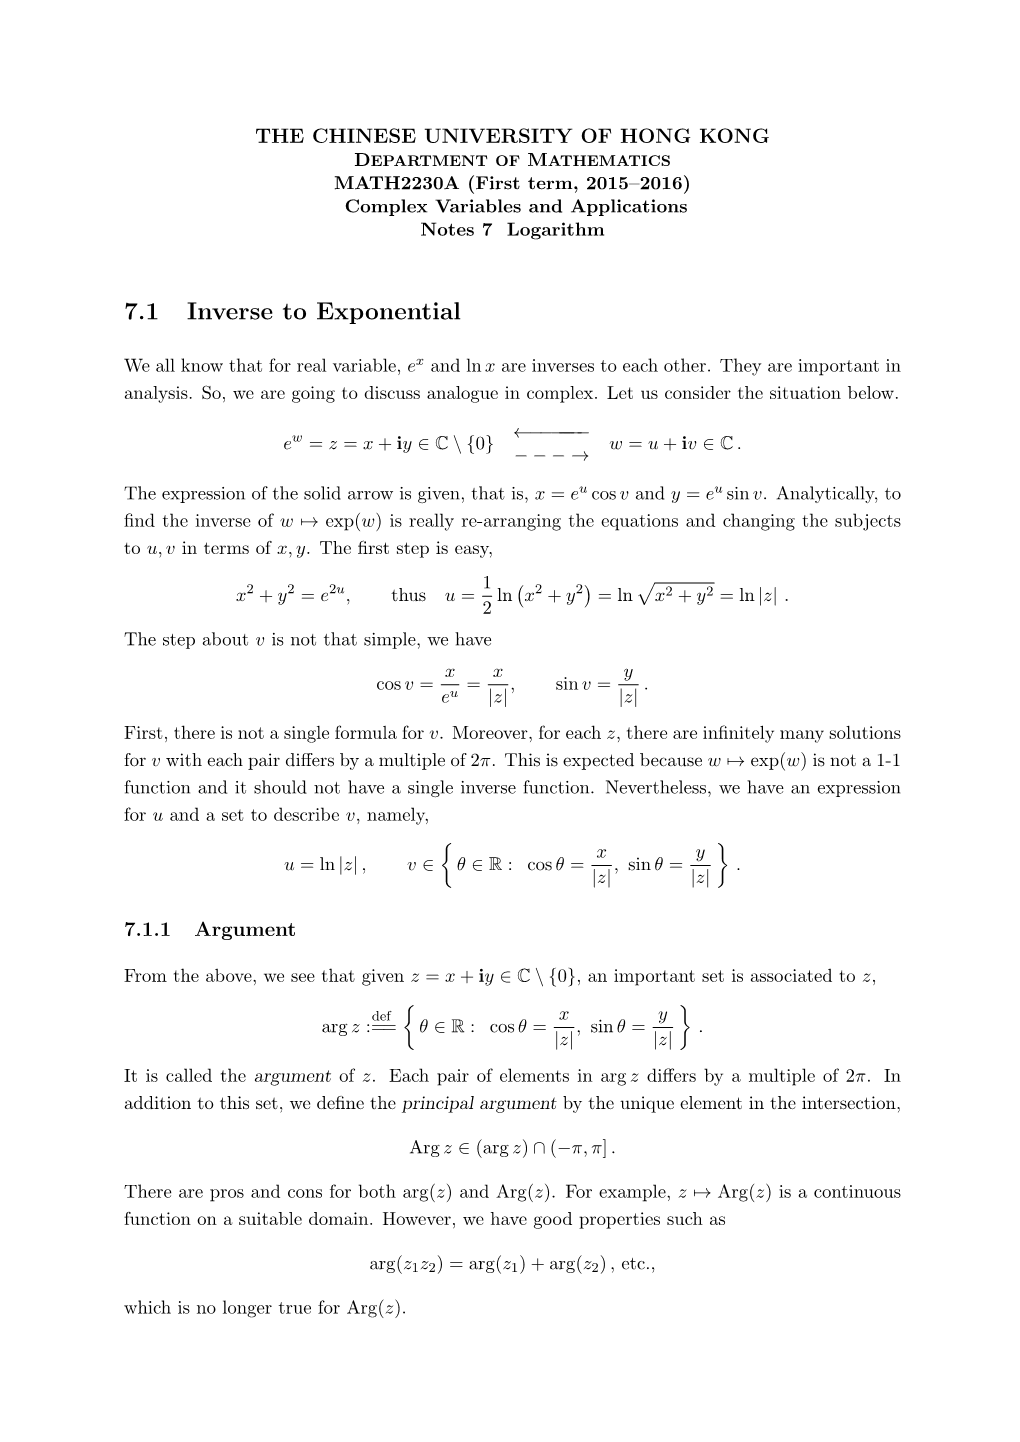 7.1 Inverse to Exponential